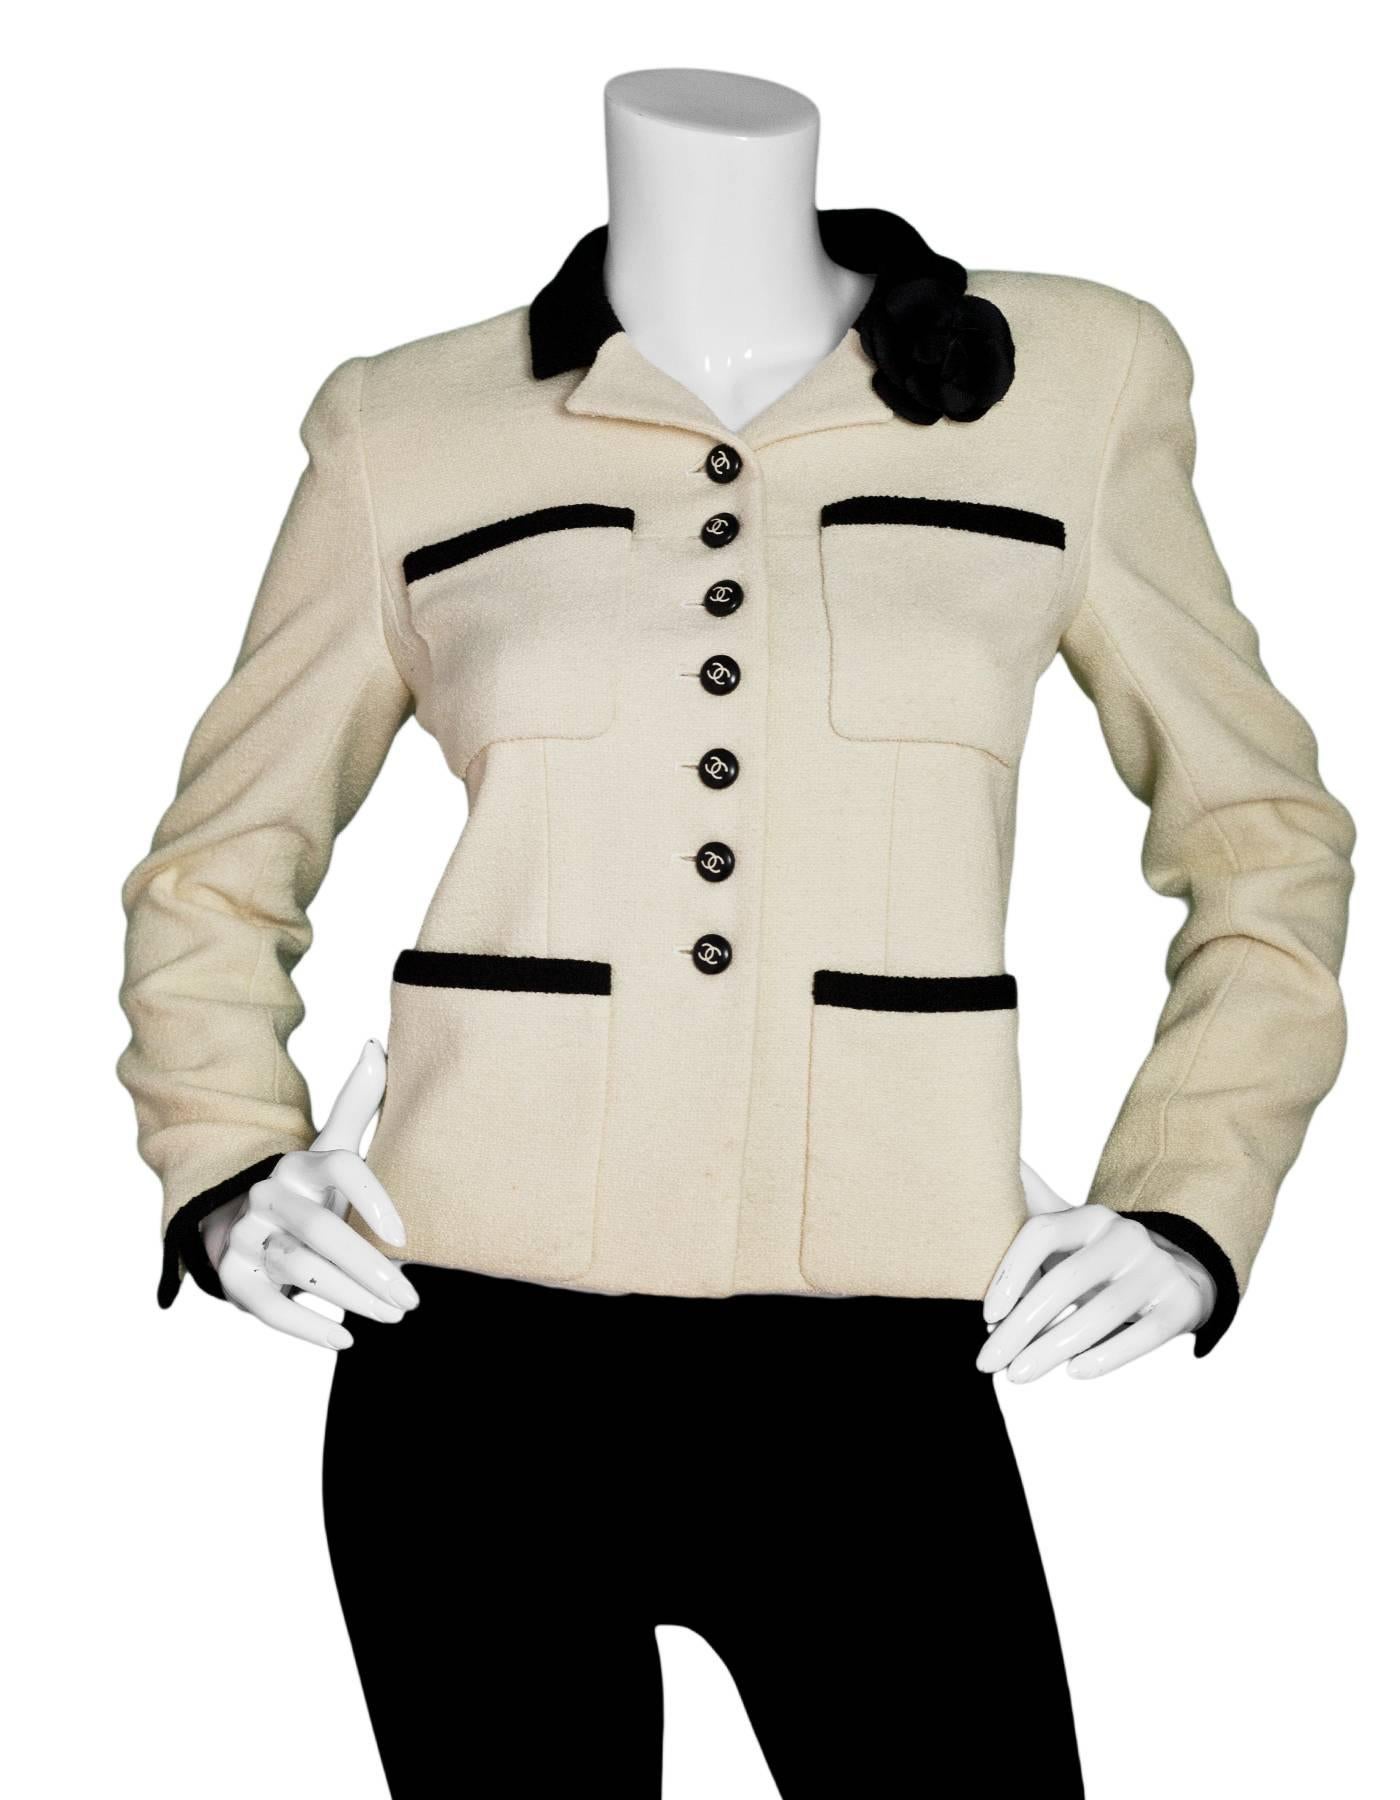 Chanel Cream & Black Jacket 
Features black and white CC buttons and a black camelia pin
**Note: Camelia pin is NOT Chanel**

Made In: France
Color: Cream and black
Composition: 92% wool, 8% nylon
Lining: Beige, 100% silk
Closure/Opening: Button